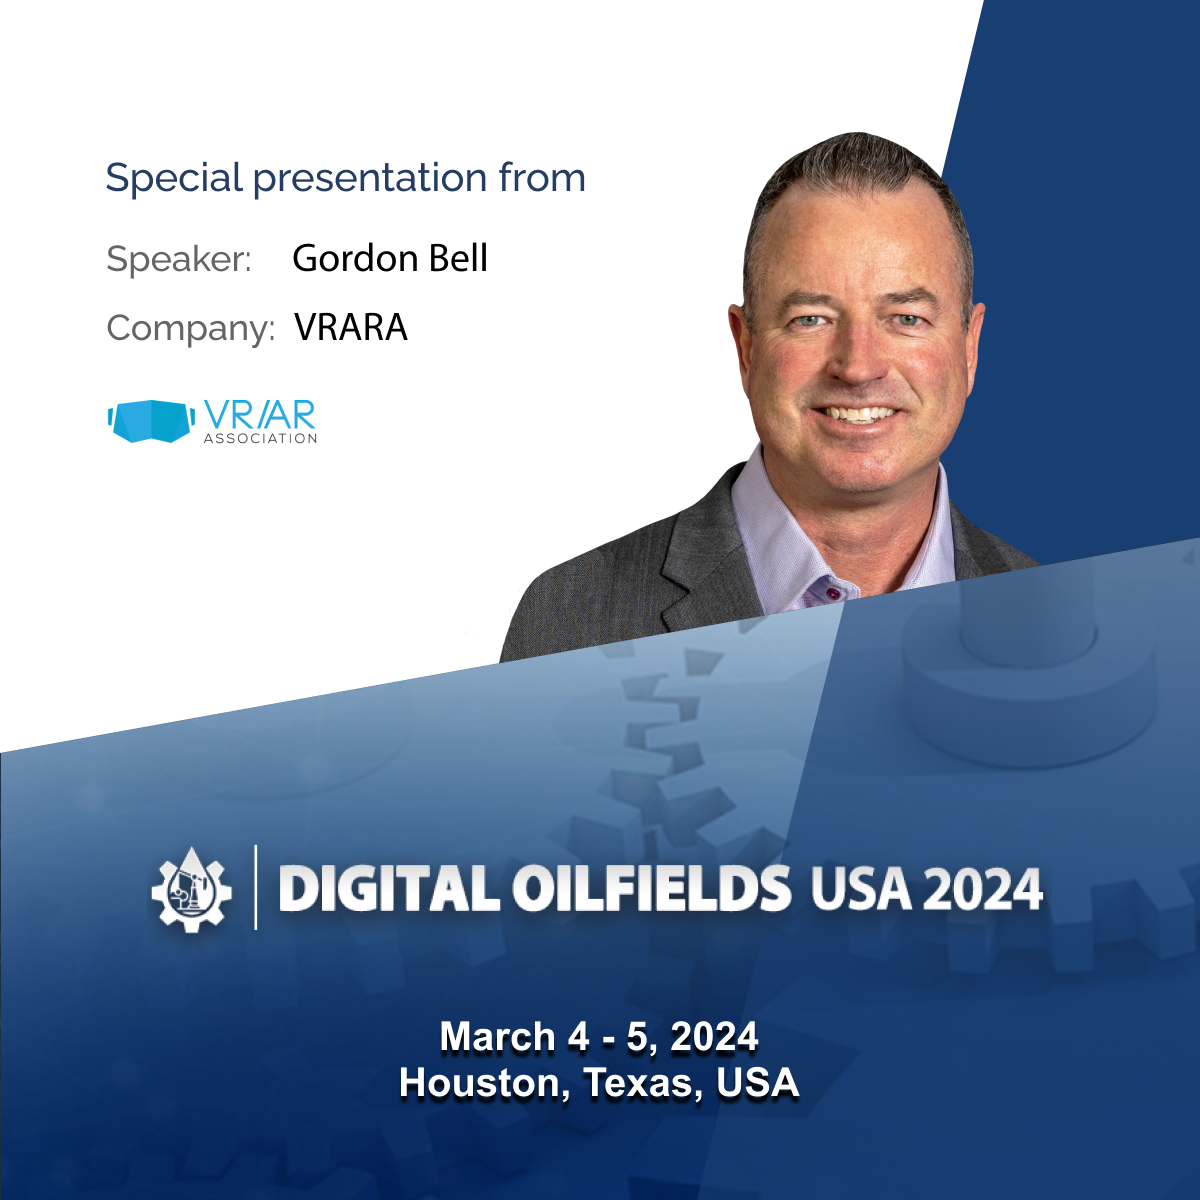 TA Studios to Showcase Pioneering VR Solutions at Digital Oilfields Expo in Houston, Texas